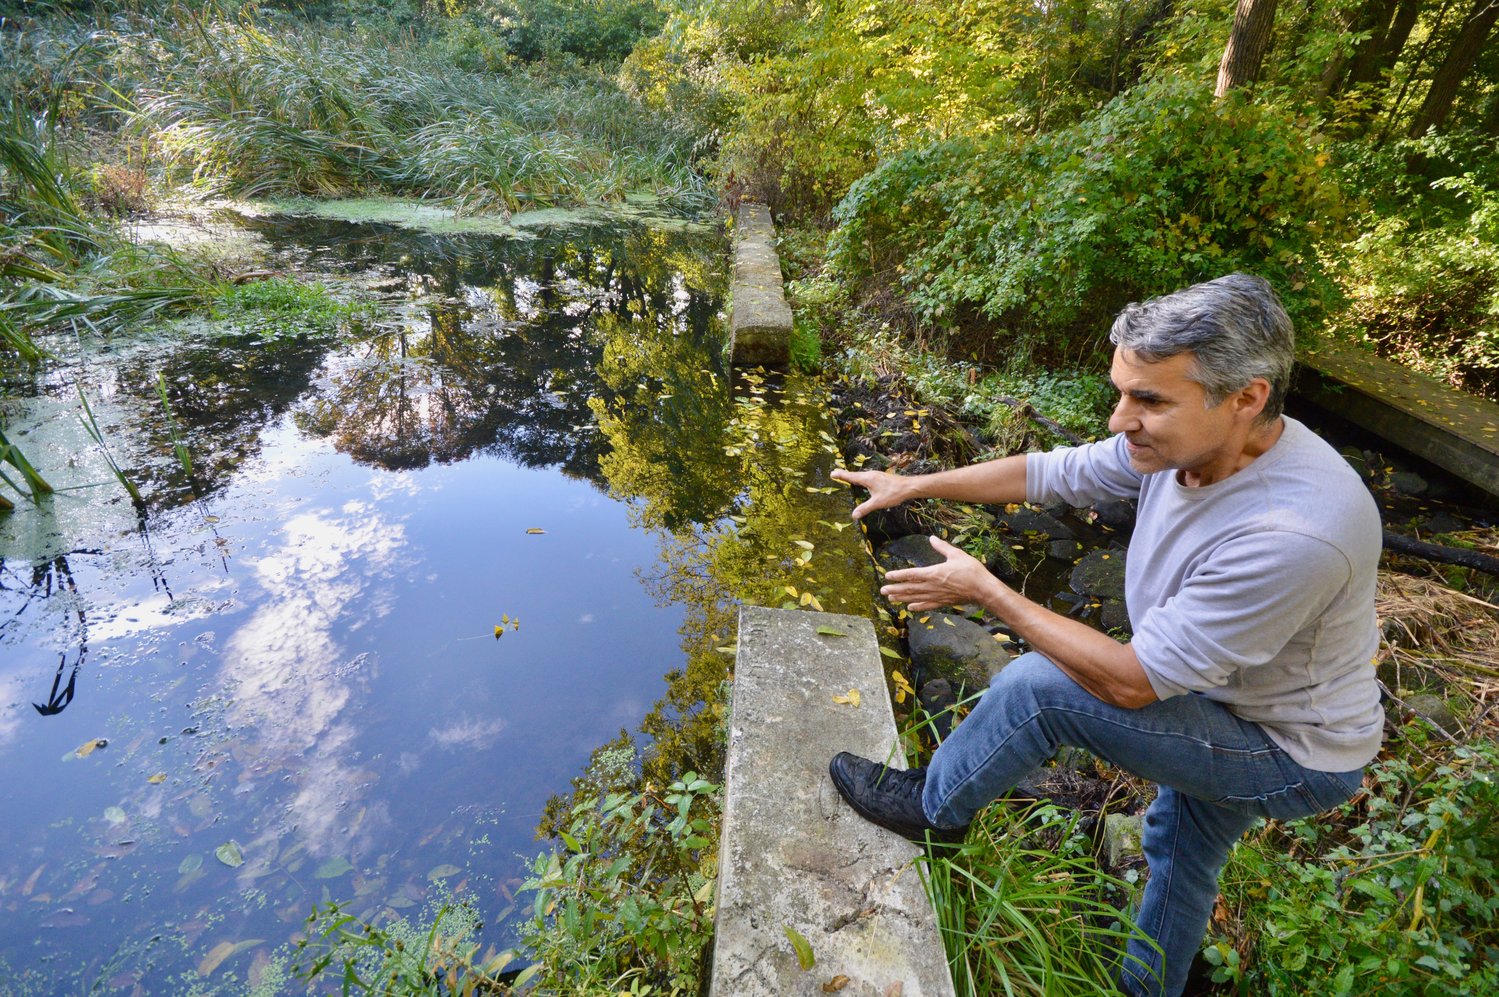 Stephen Luce, chairman of the Melville Park Committee, inspects one of the smaller ponds at Melville Park. The dam for this one has either broken or been modified, allowing water to flow freely.